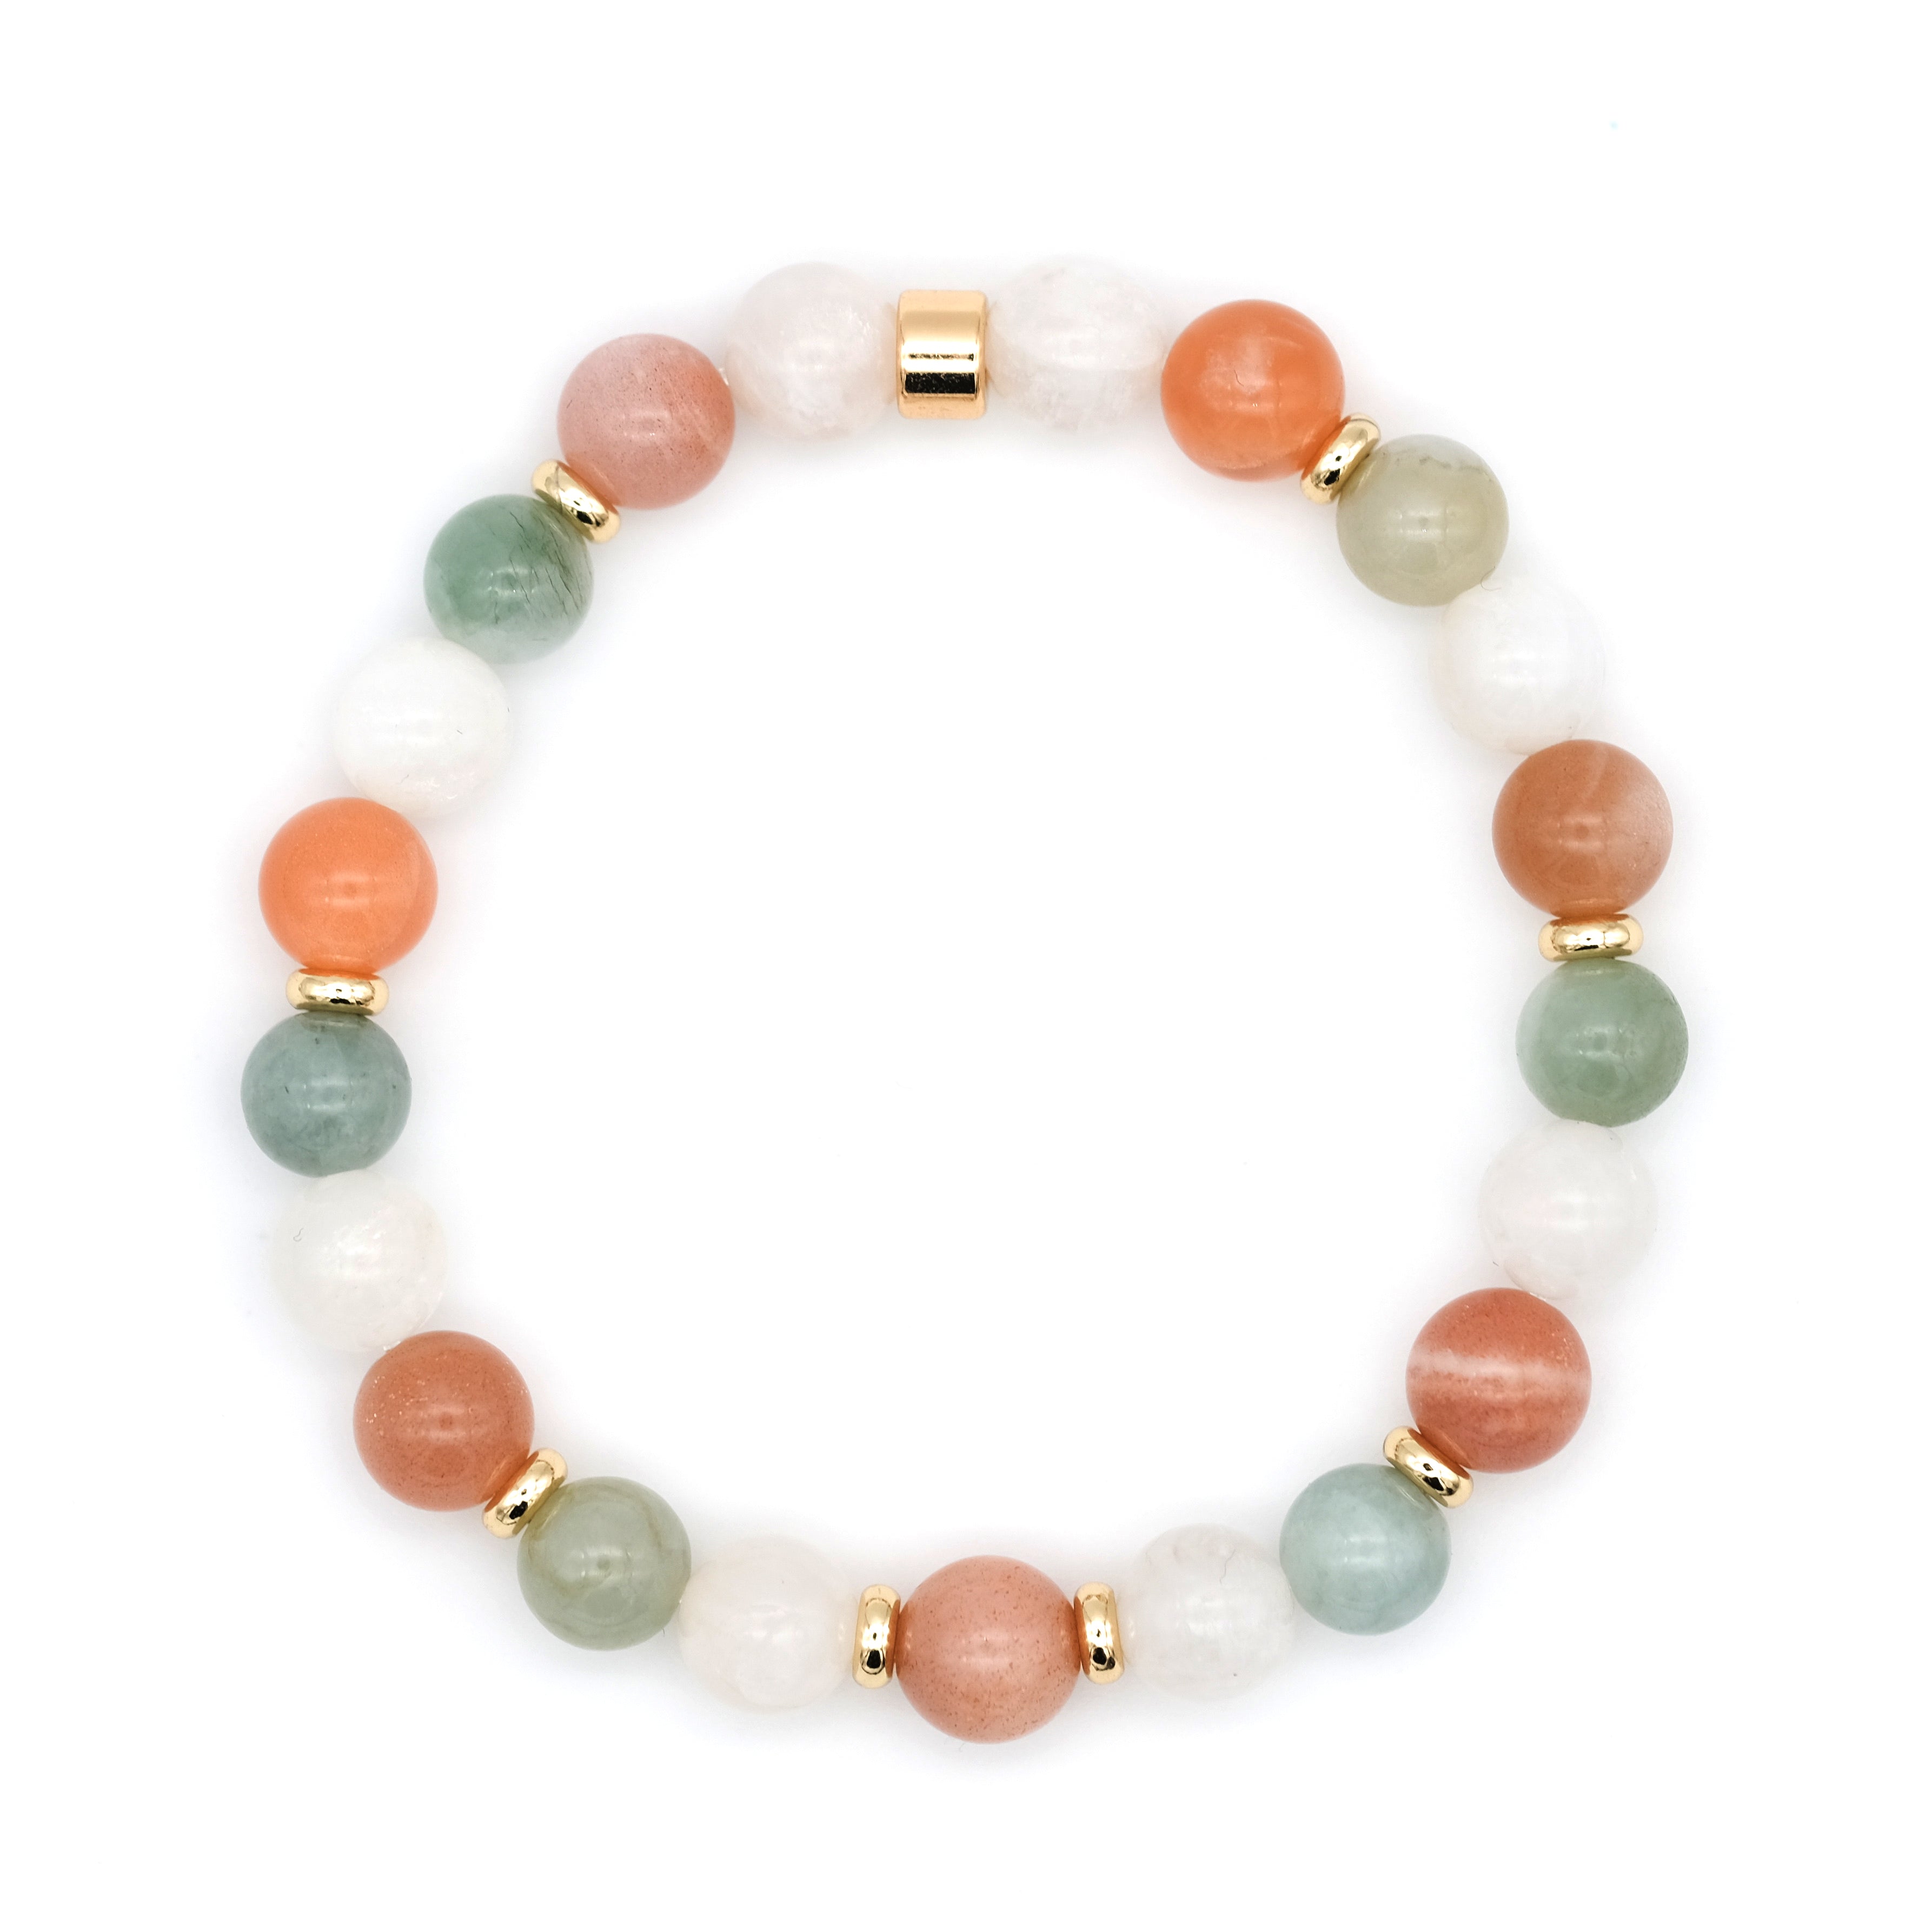 A moonstone, sunstone and jade gemstone bracelet with 18ct gold plated accessories from above